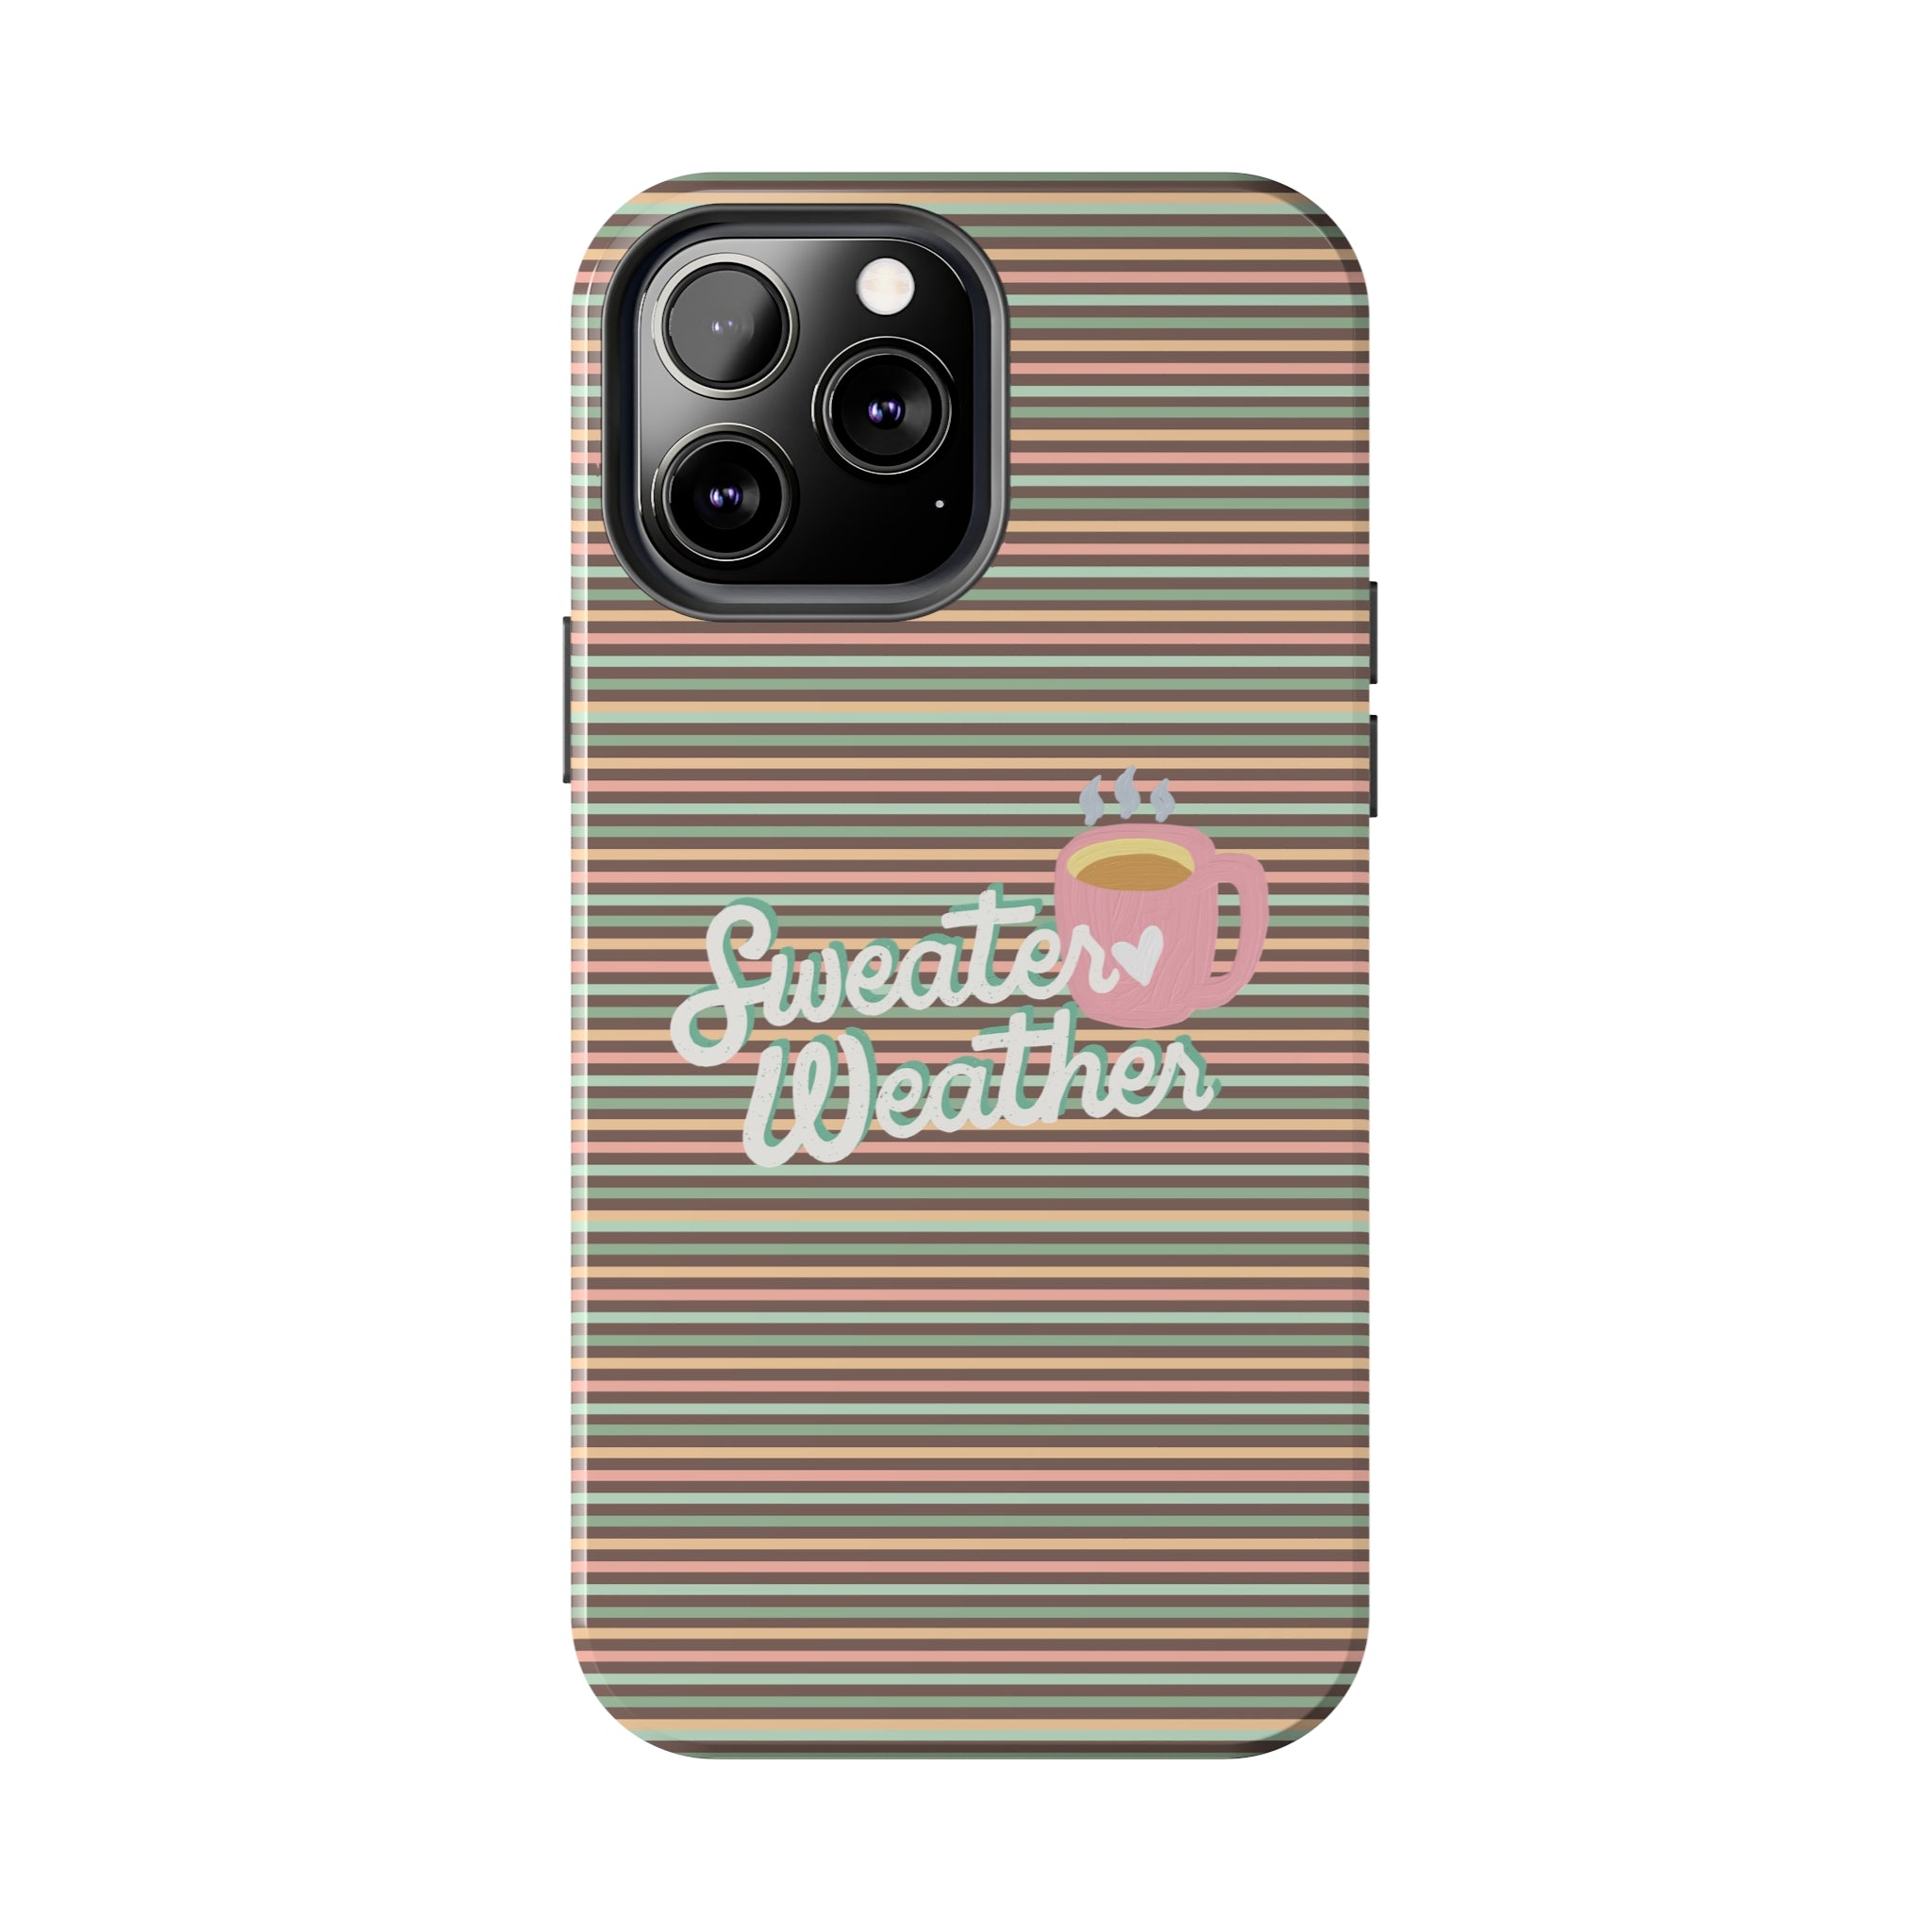 Sweater Weather -  Tough iPhone Cases - 21 Sizes